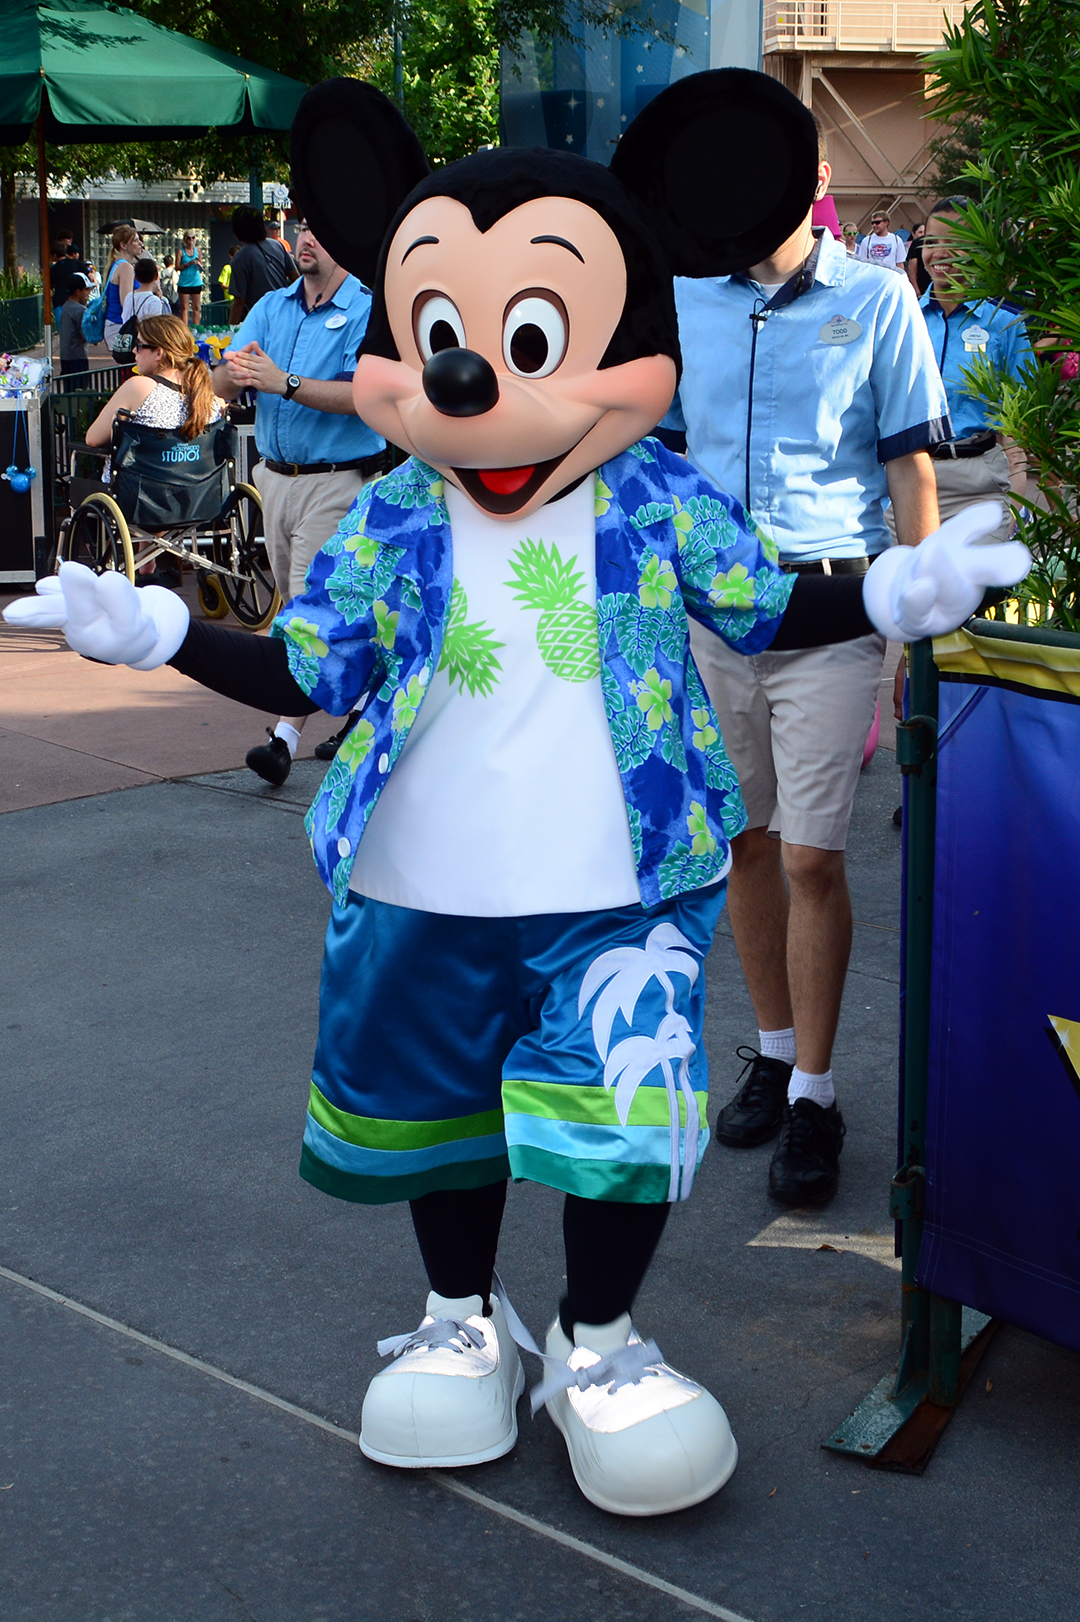 Mickey Mouse at Rock your summer side dance party at Hollywood Studios June 2014